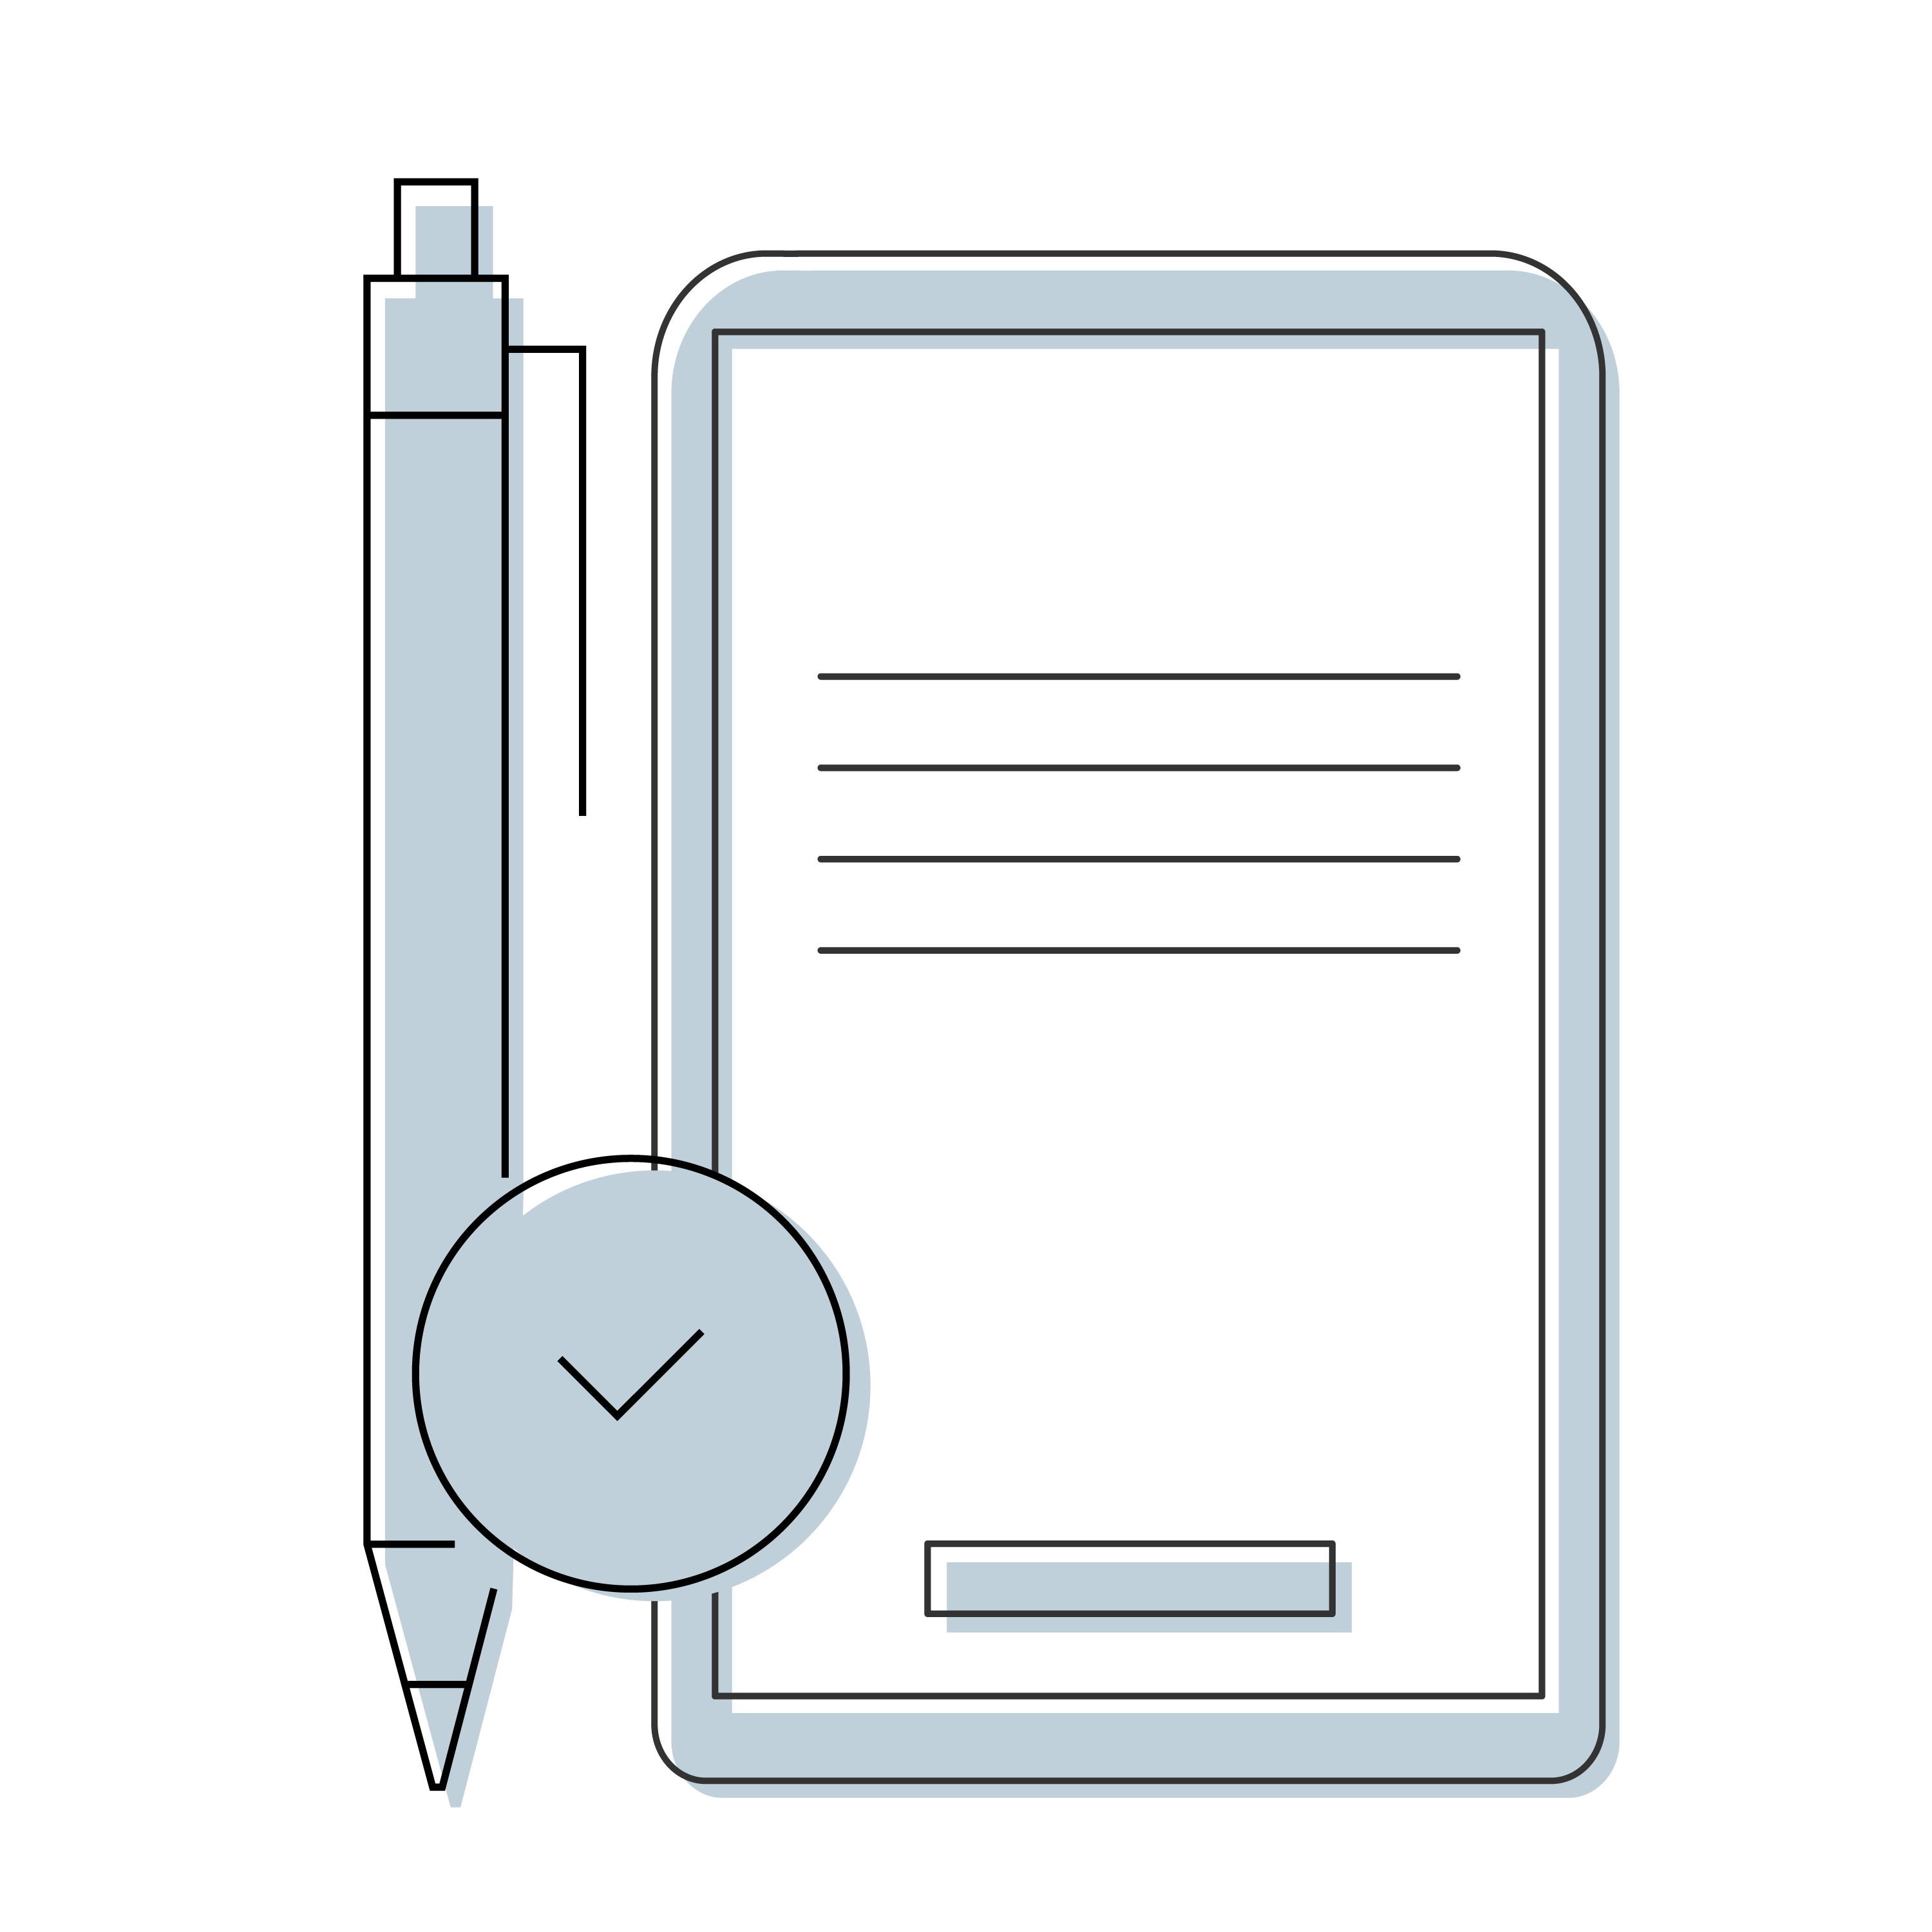 An icon representing quality assurance showing a pen and a tick mark next to a document